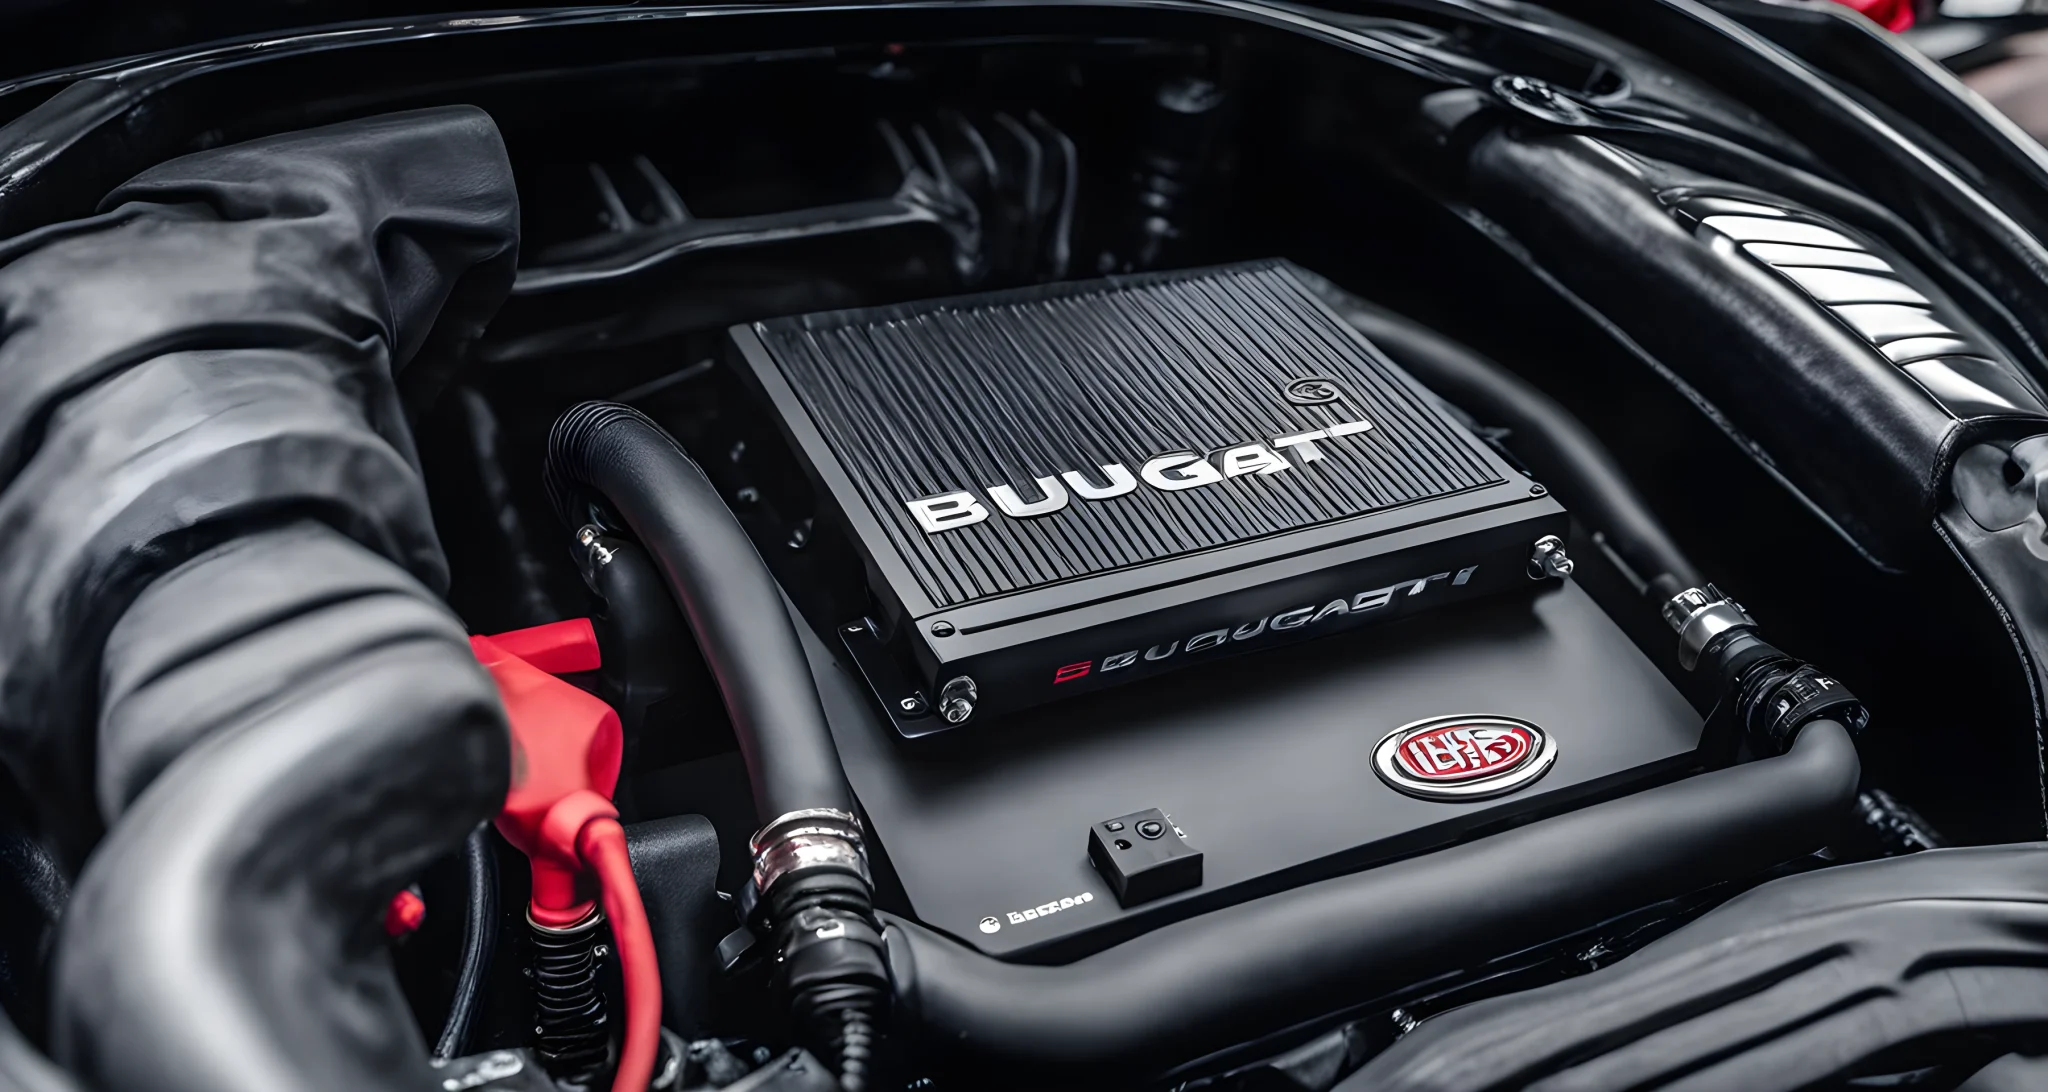 The image shows a close-up of a sleek, black Bugatti ECU remapping tool connected to the engine.